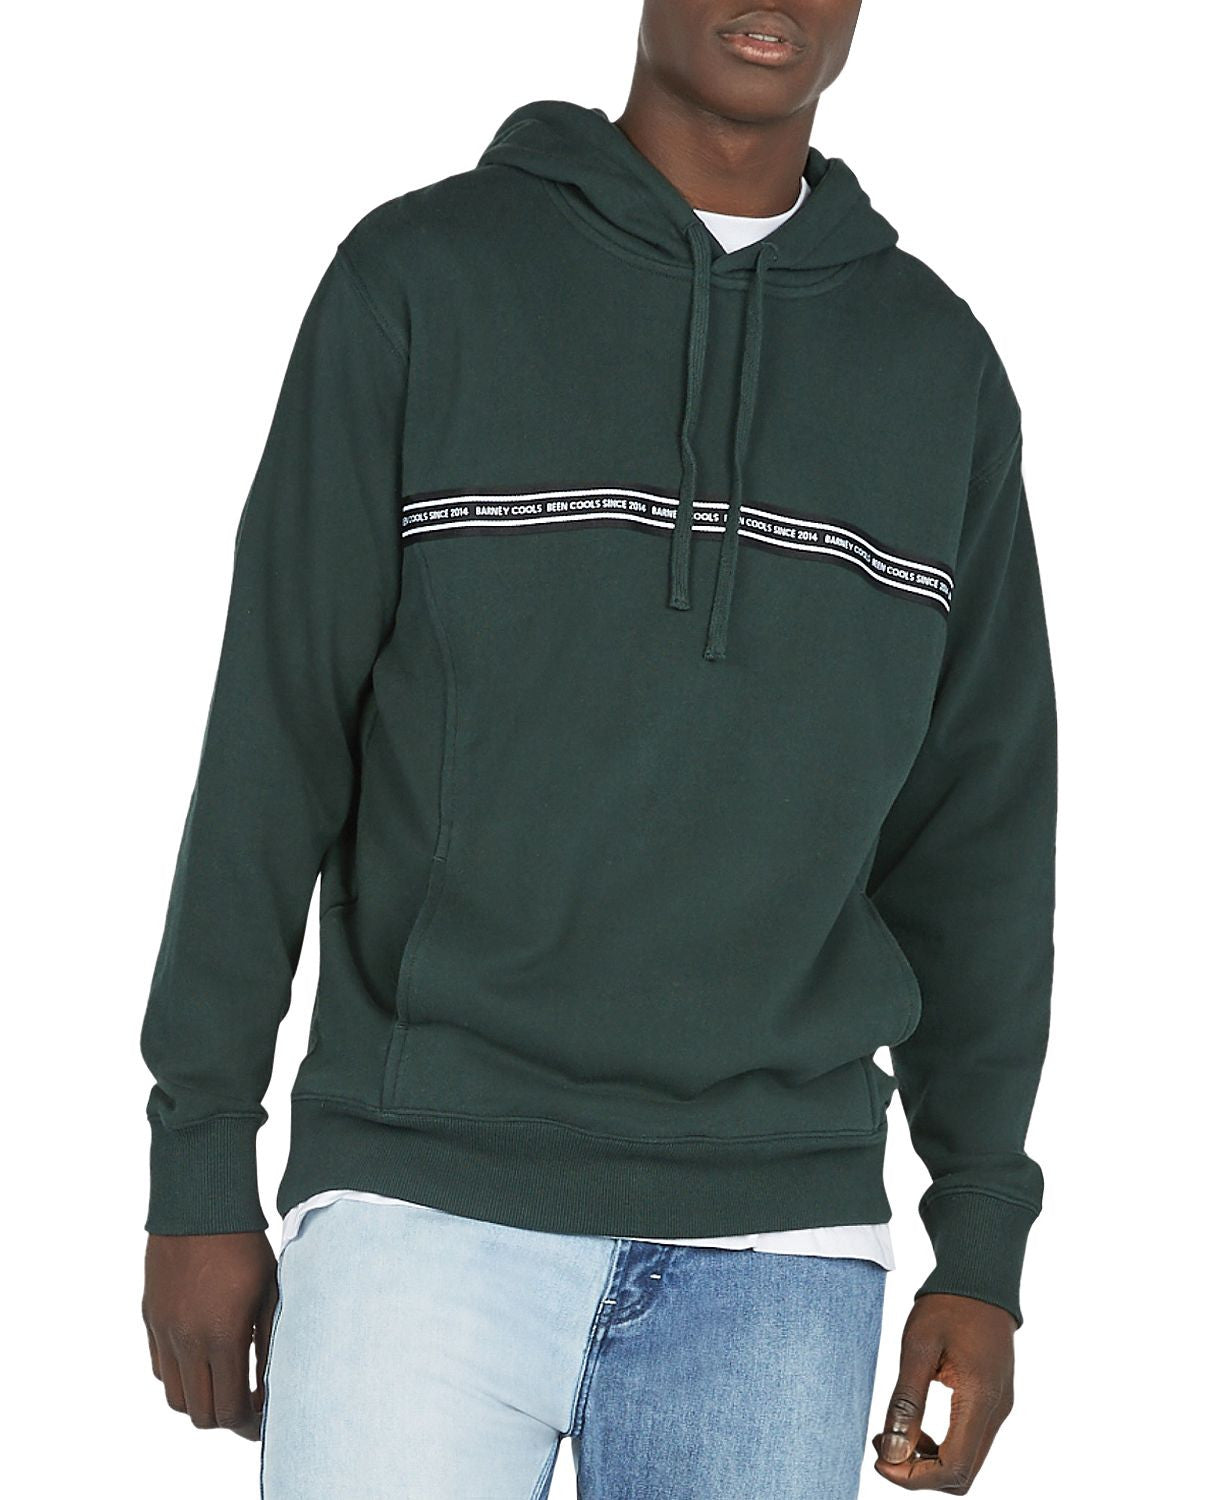 Barney Cools B.quick Tape Hooded Sweatshirt Forest